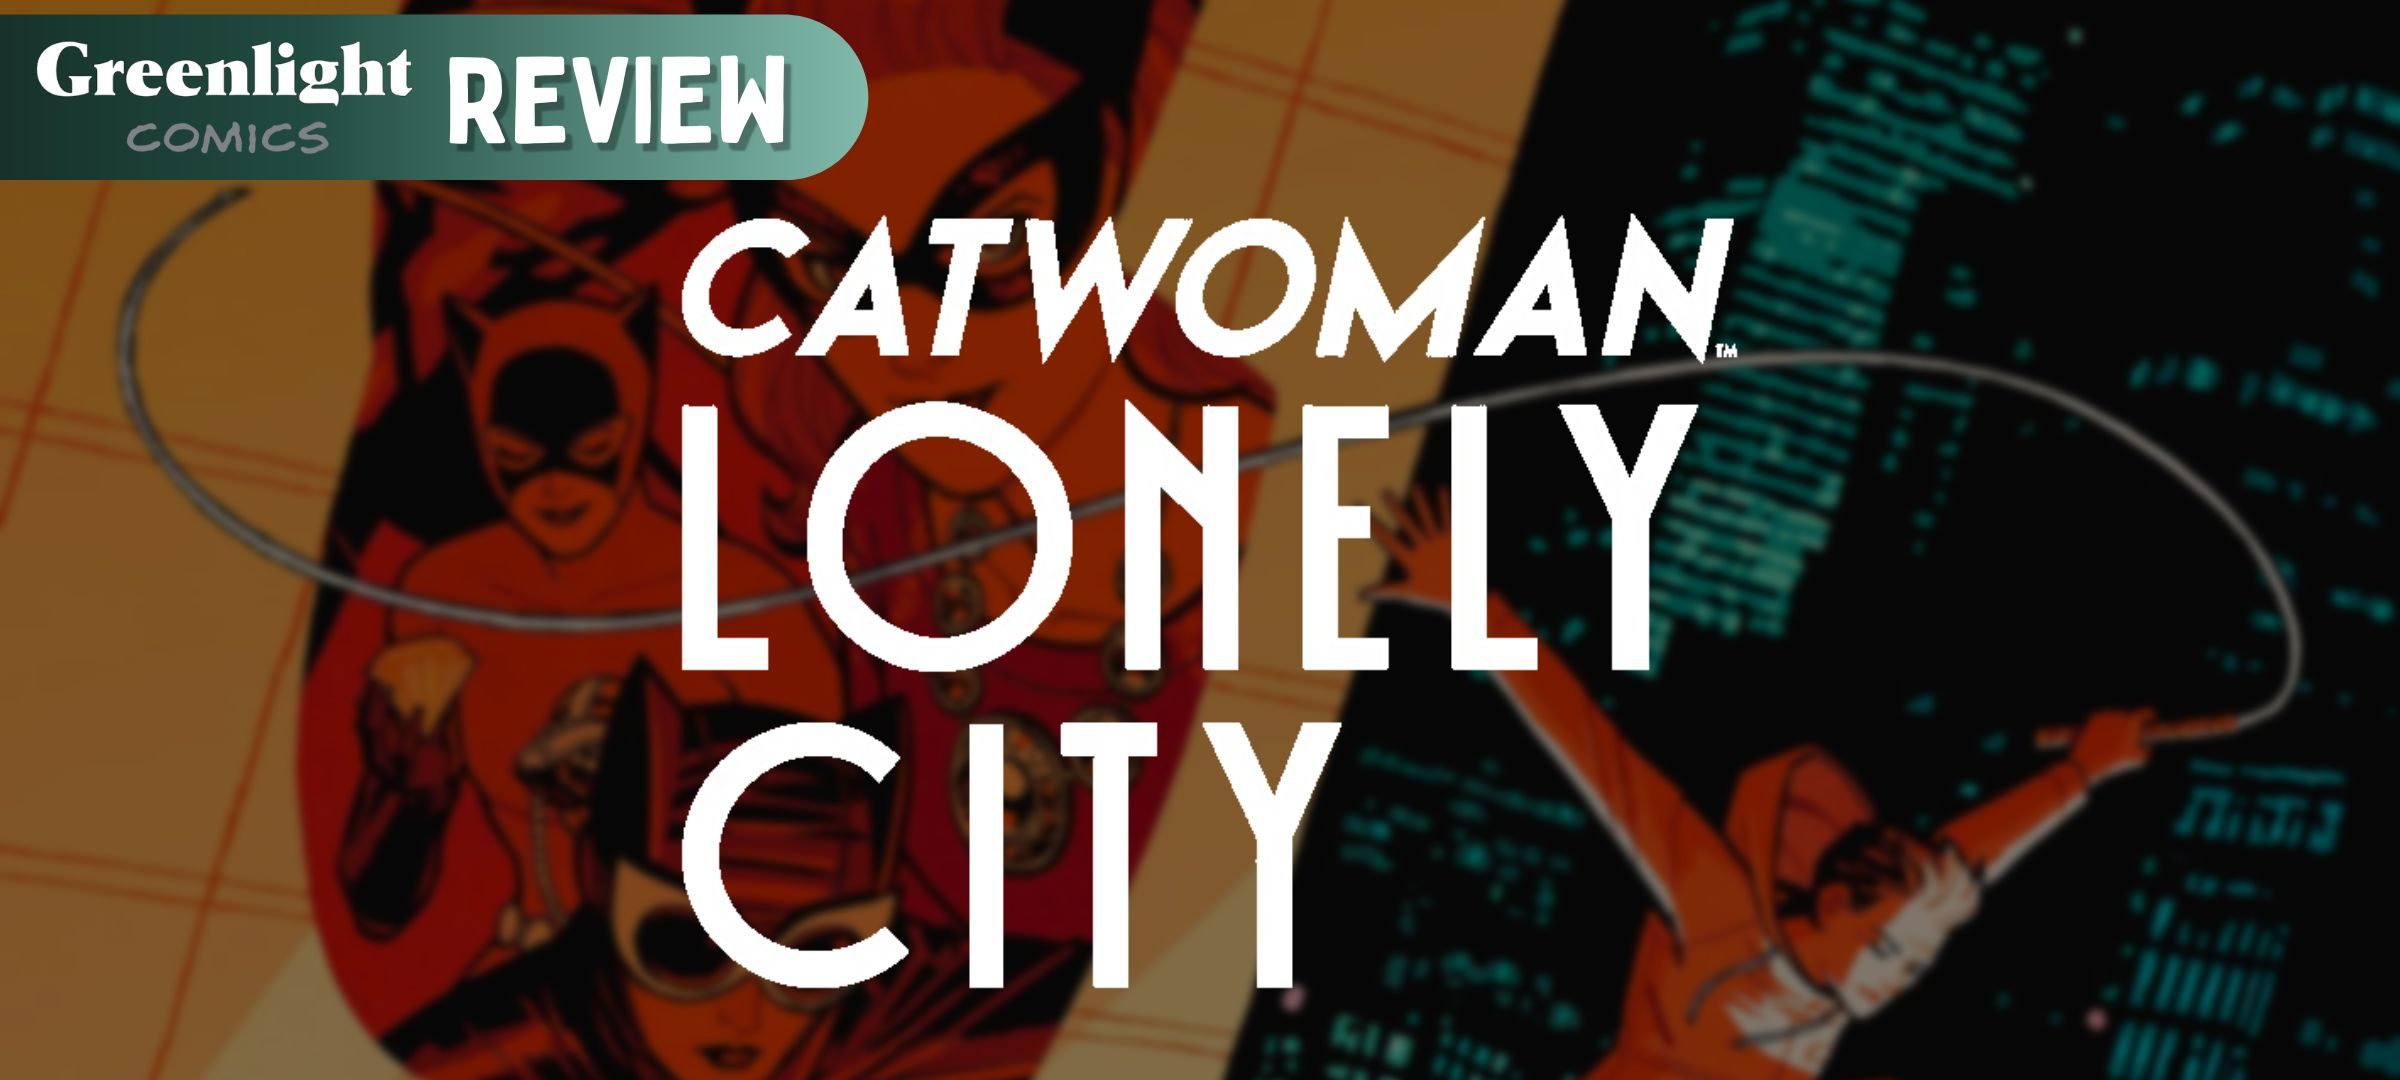 catwomanlonelycityreview